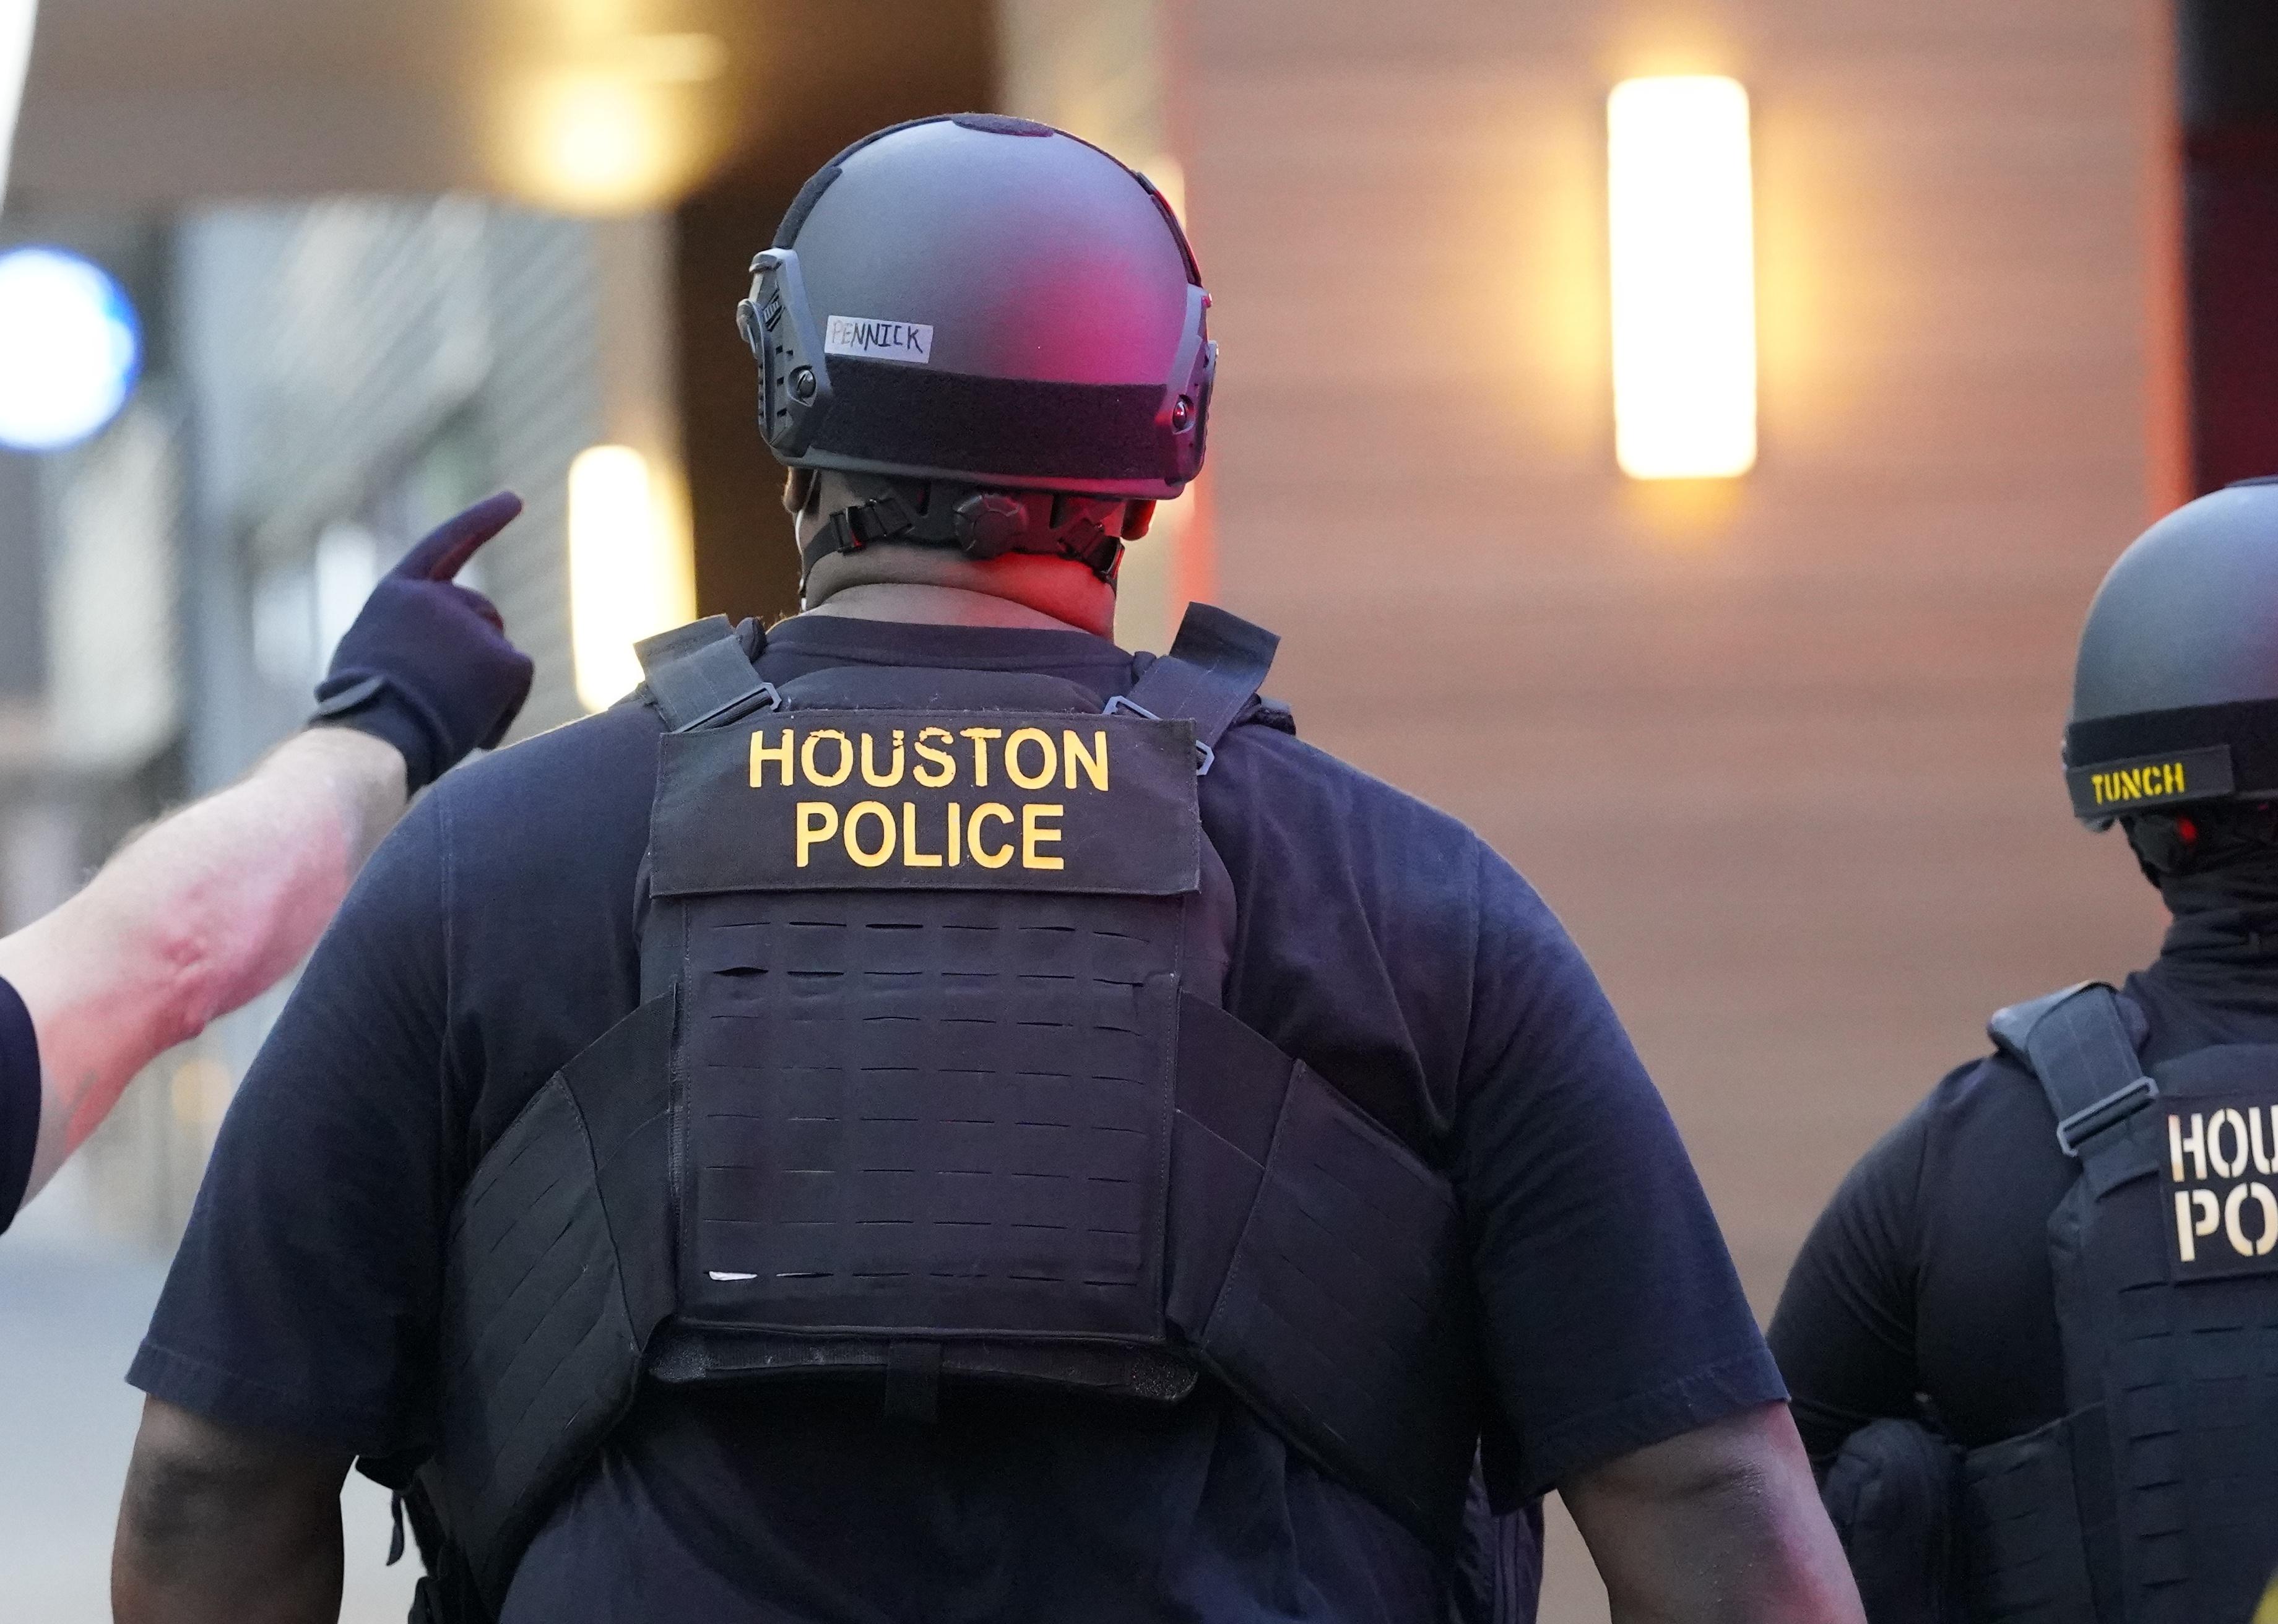 Back view of a Houston police officer.